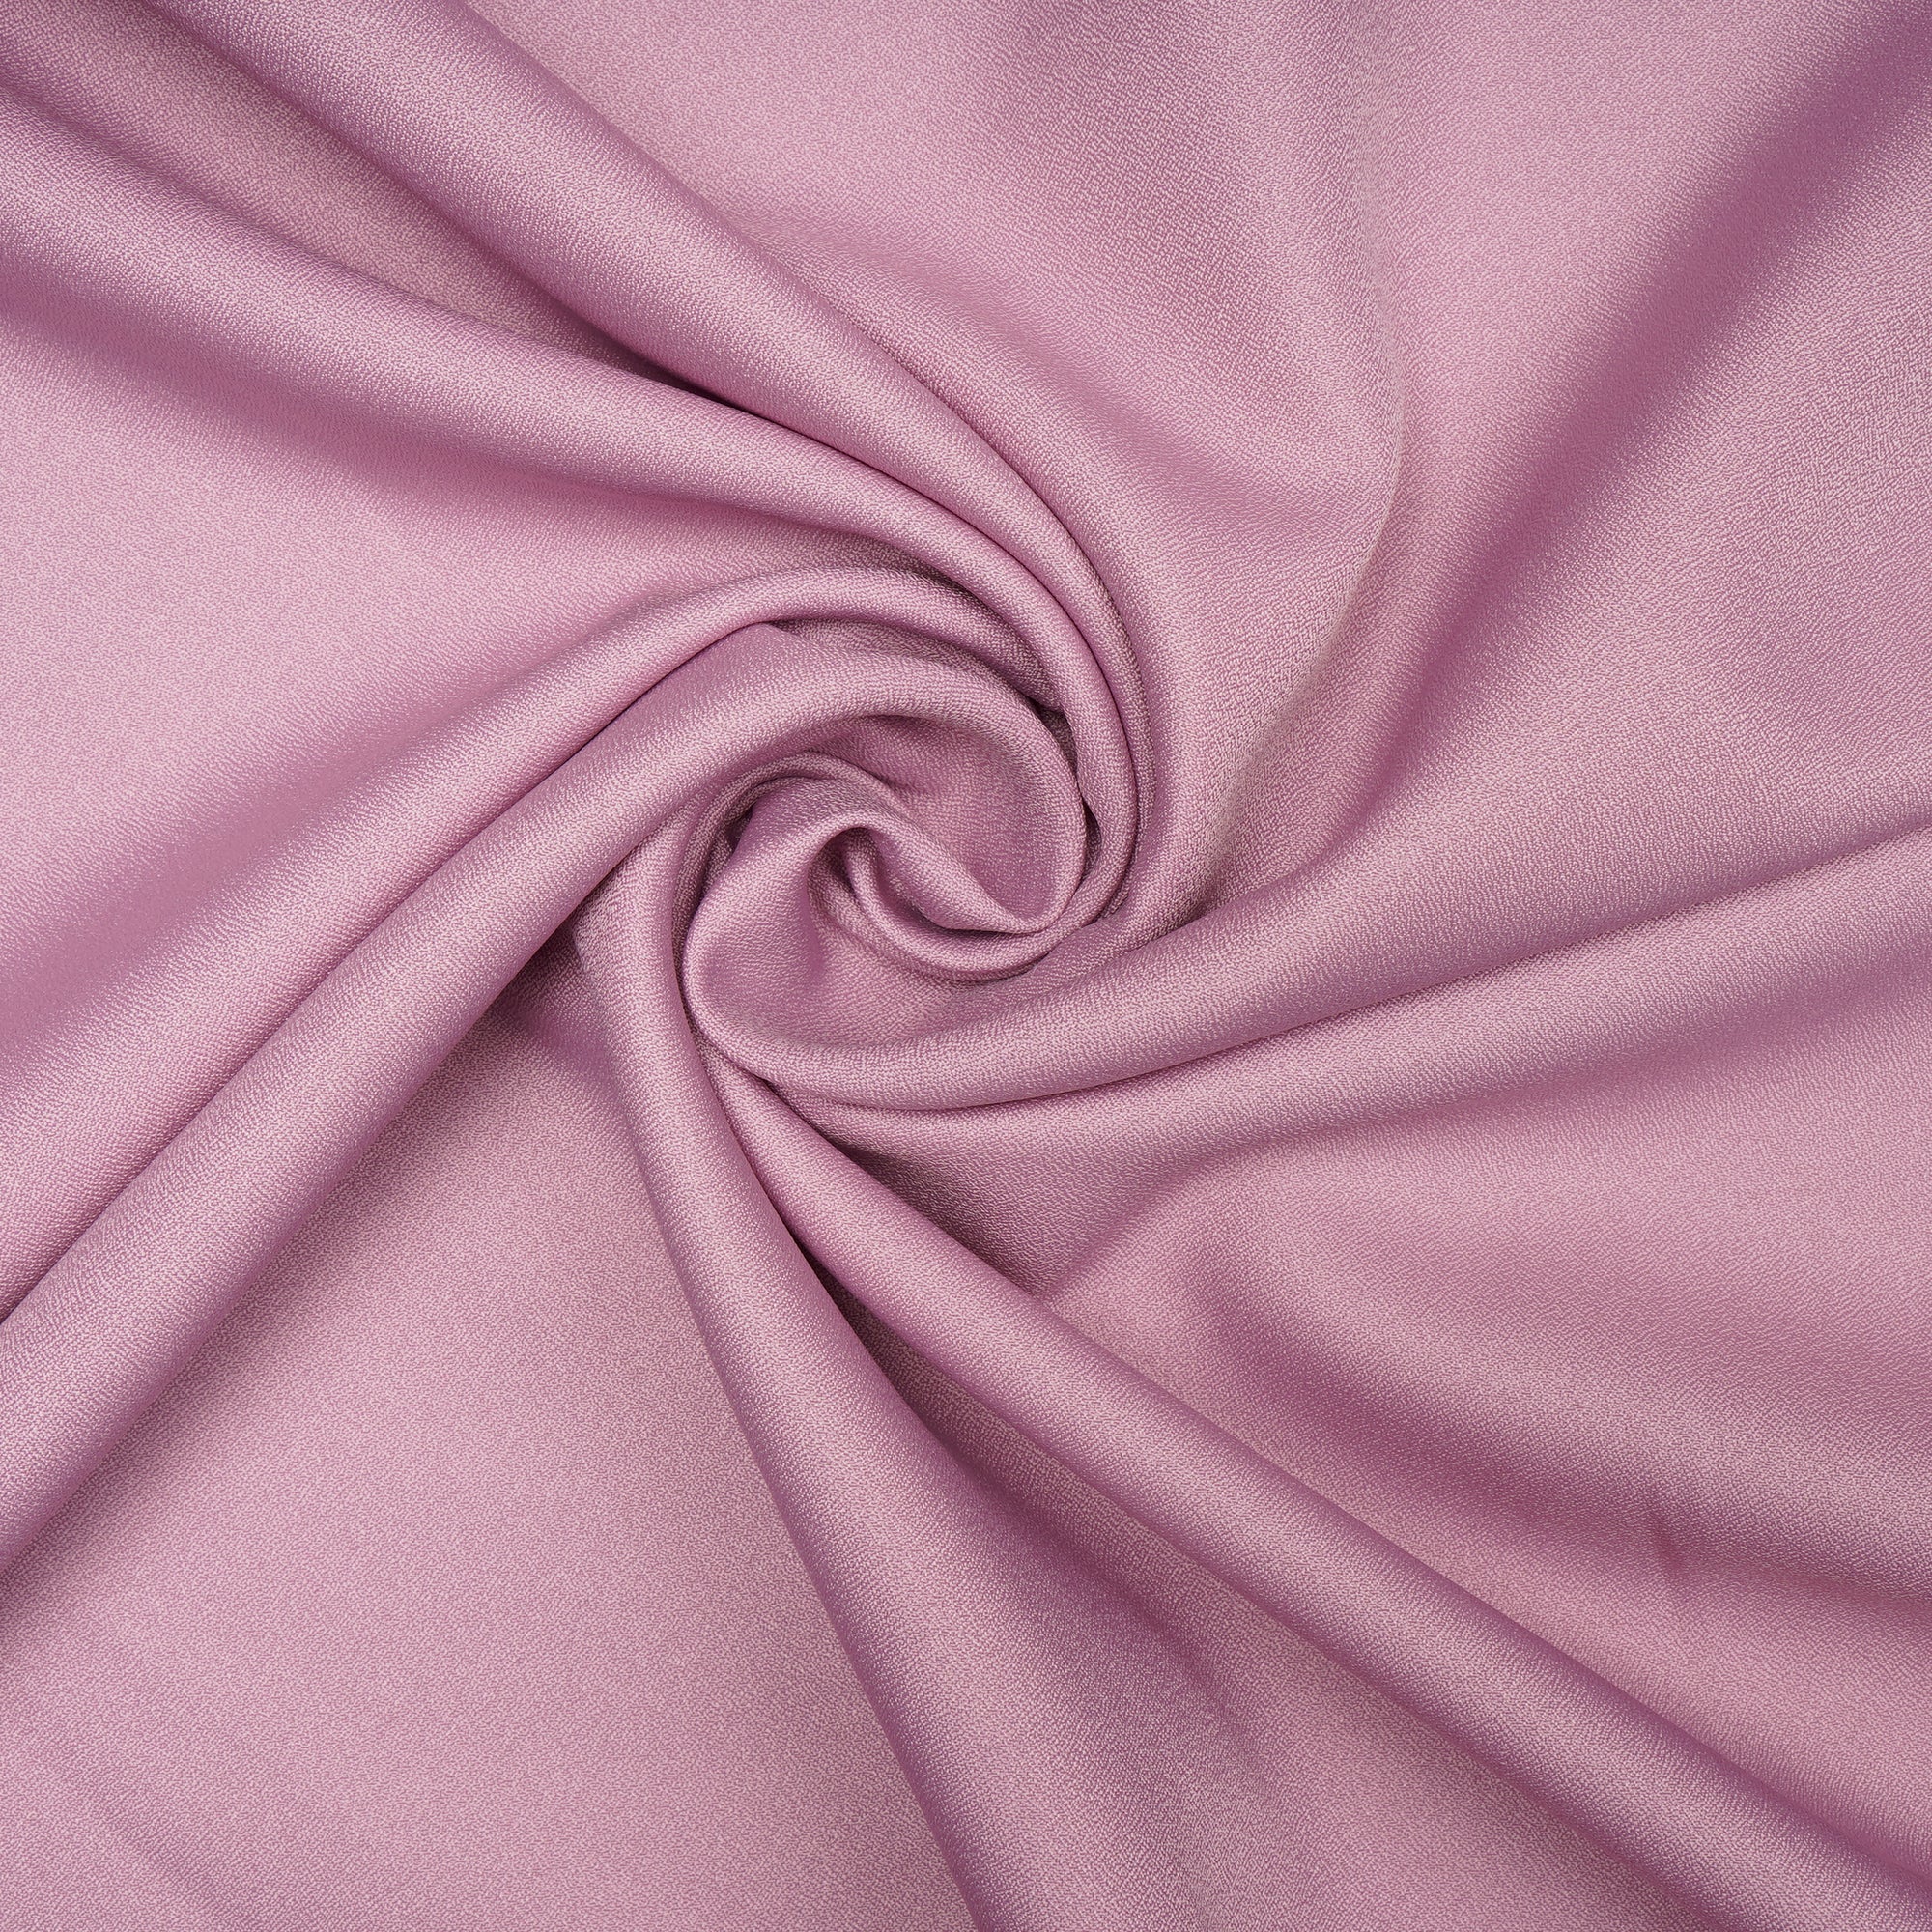 Pale Rose Solid Dyed Imported Amazon Moss Crepe Fabric (60" Width)